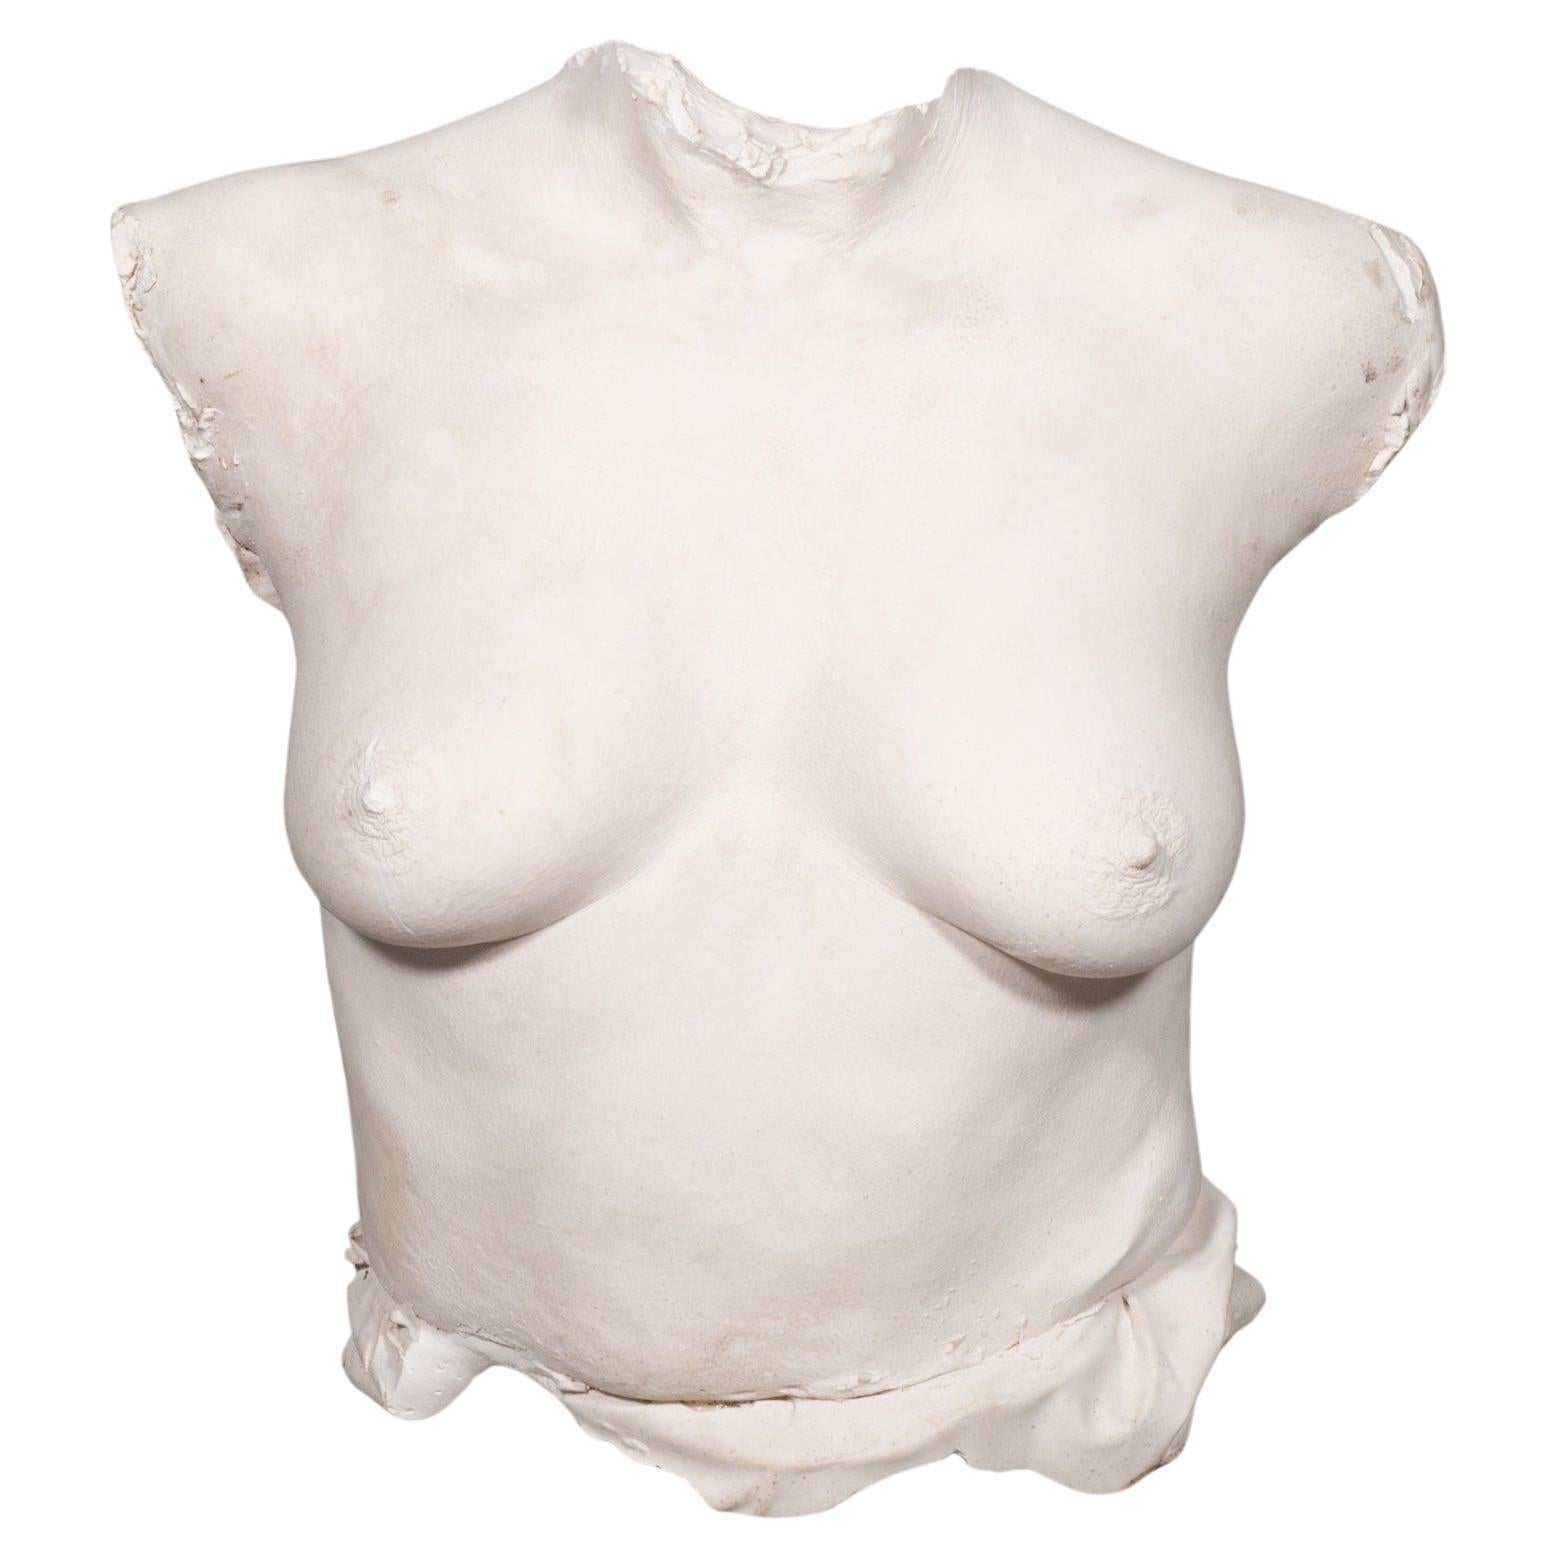 Christopher Tucker Plaster Cast Wall Sculpture of a Woman's Torso C.1950 For Sale